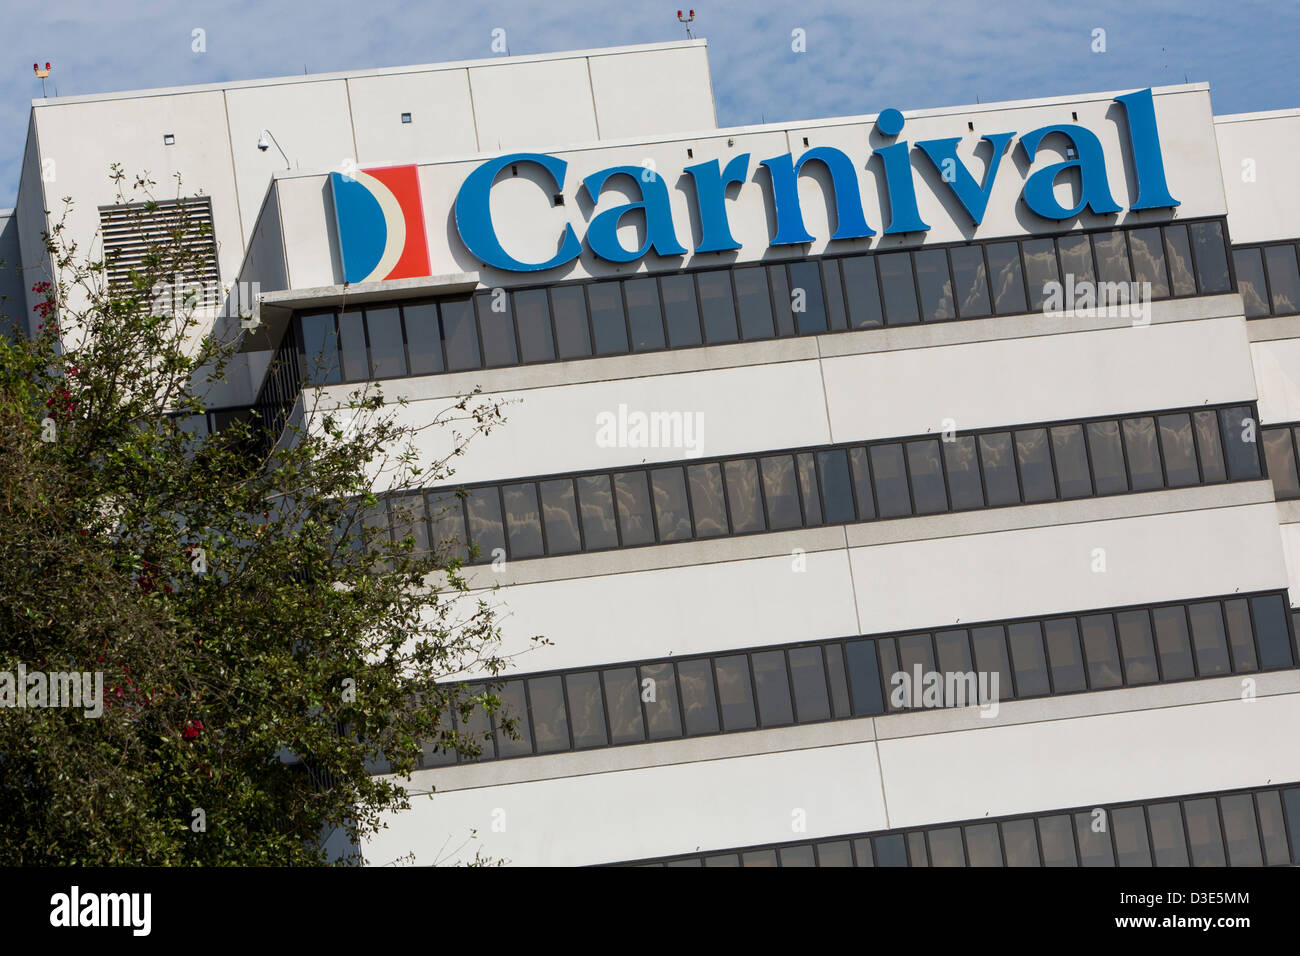 The Usa Headquarters Of Cruise Operator Carnival Cruise Lines D3E5MM 